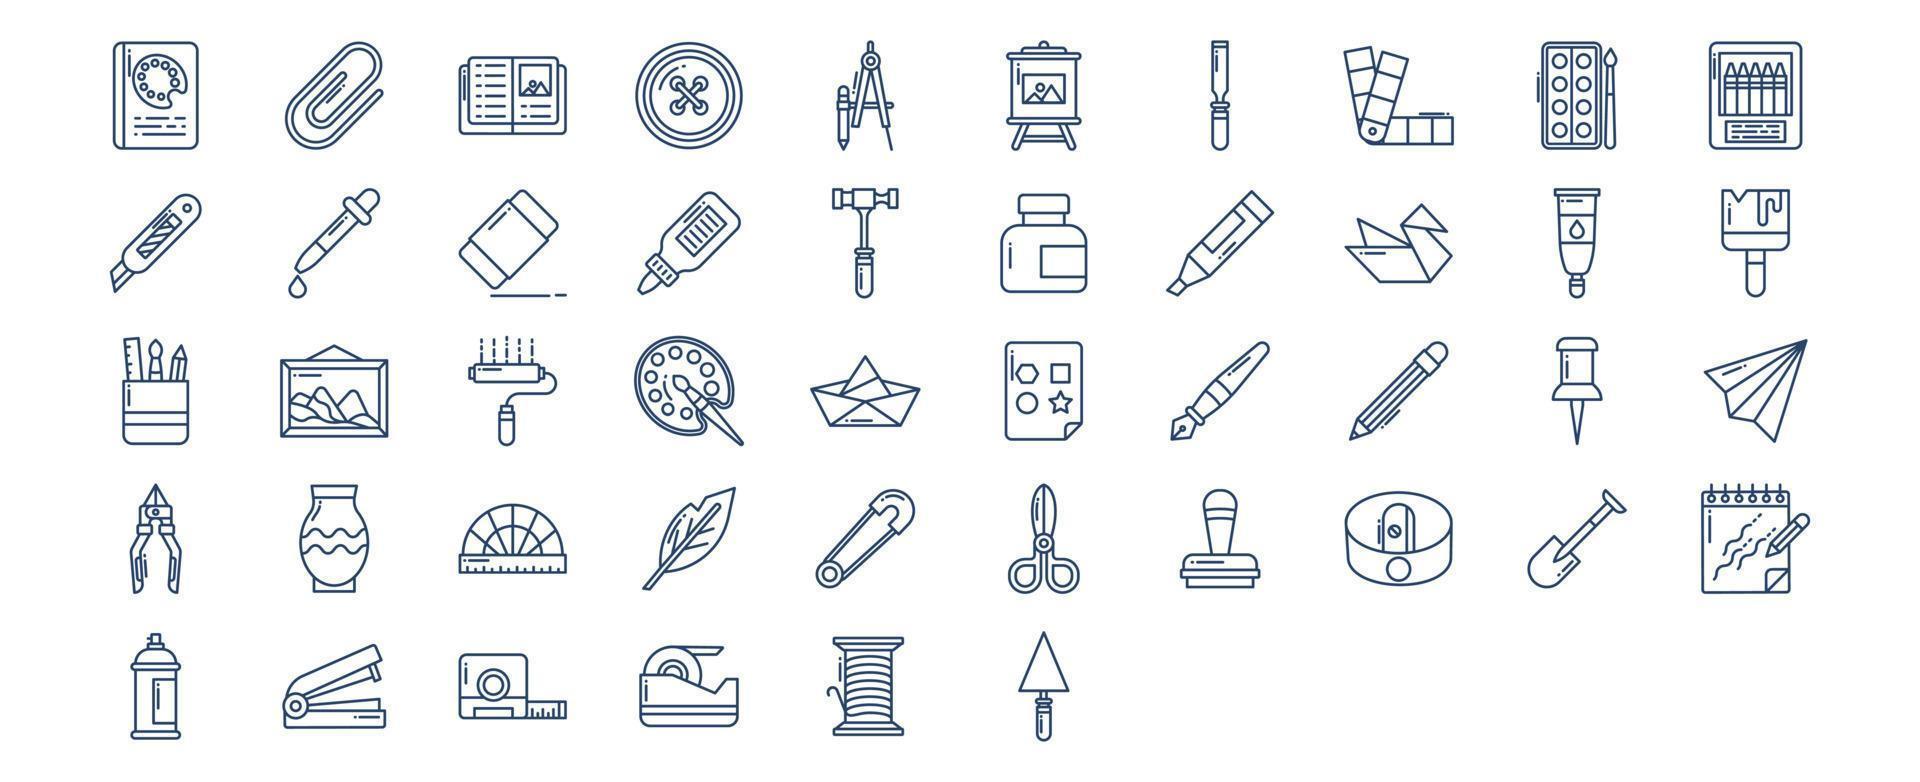 Collection of icons related to Craft and tools, including icons like Book, Attach, crayons,  Drop and more. vector illustrations, Pixel Perfect set